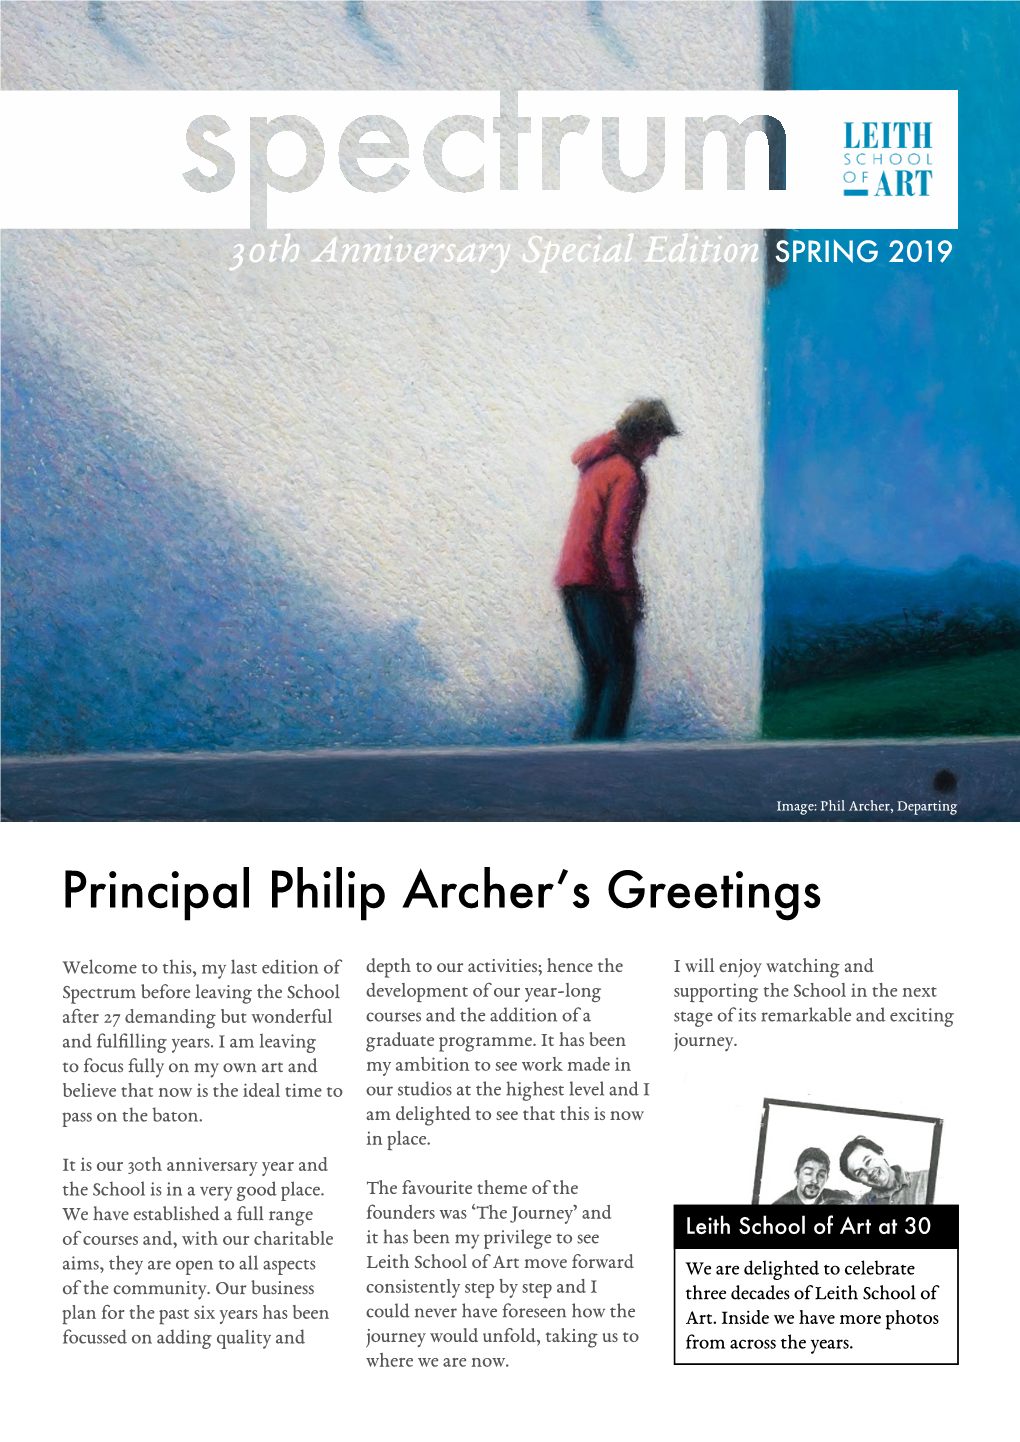 Philip Archer's Greetings